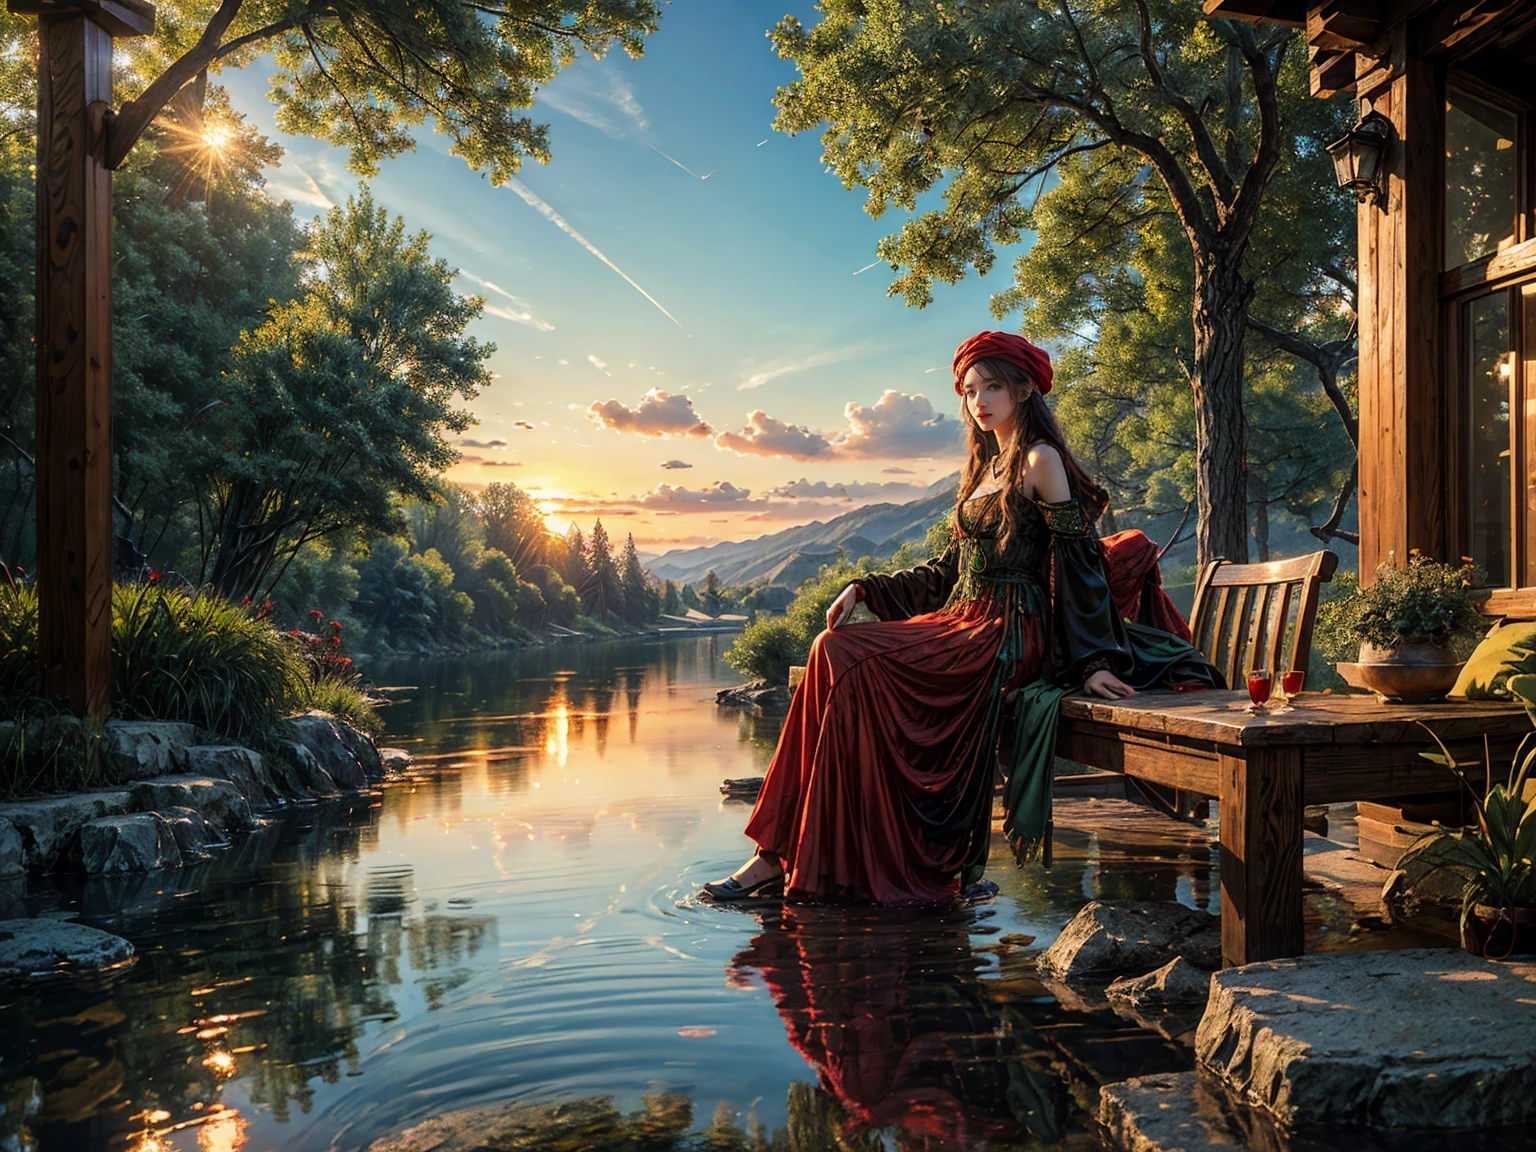 Peter Lik-styled, ultra-realistic and highly detailed pen and ink rendition of a young, hippie-fashioned woman, donned in a green-yellow-red Rastacap, deeply engaged in the act of smoking hookah by the tranquil lake after sundown, reminiscent of Vasnetsov's "Alyonushka". The focus shifts dramatically towards the mesmerizing reflection mirrored in the still water((masterpiece, highest quality, Highest image quality, High resolution, photorealistic, Raw photo, 8K)), , 